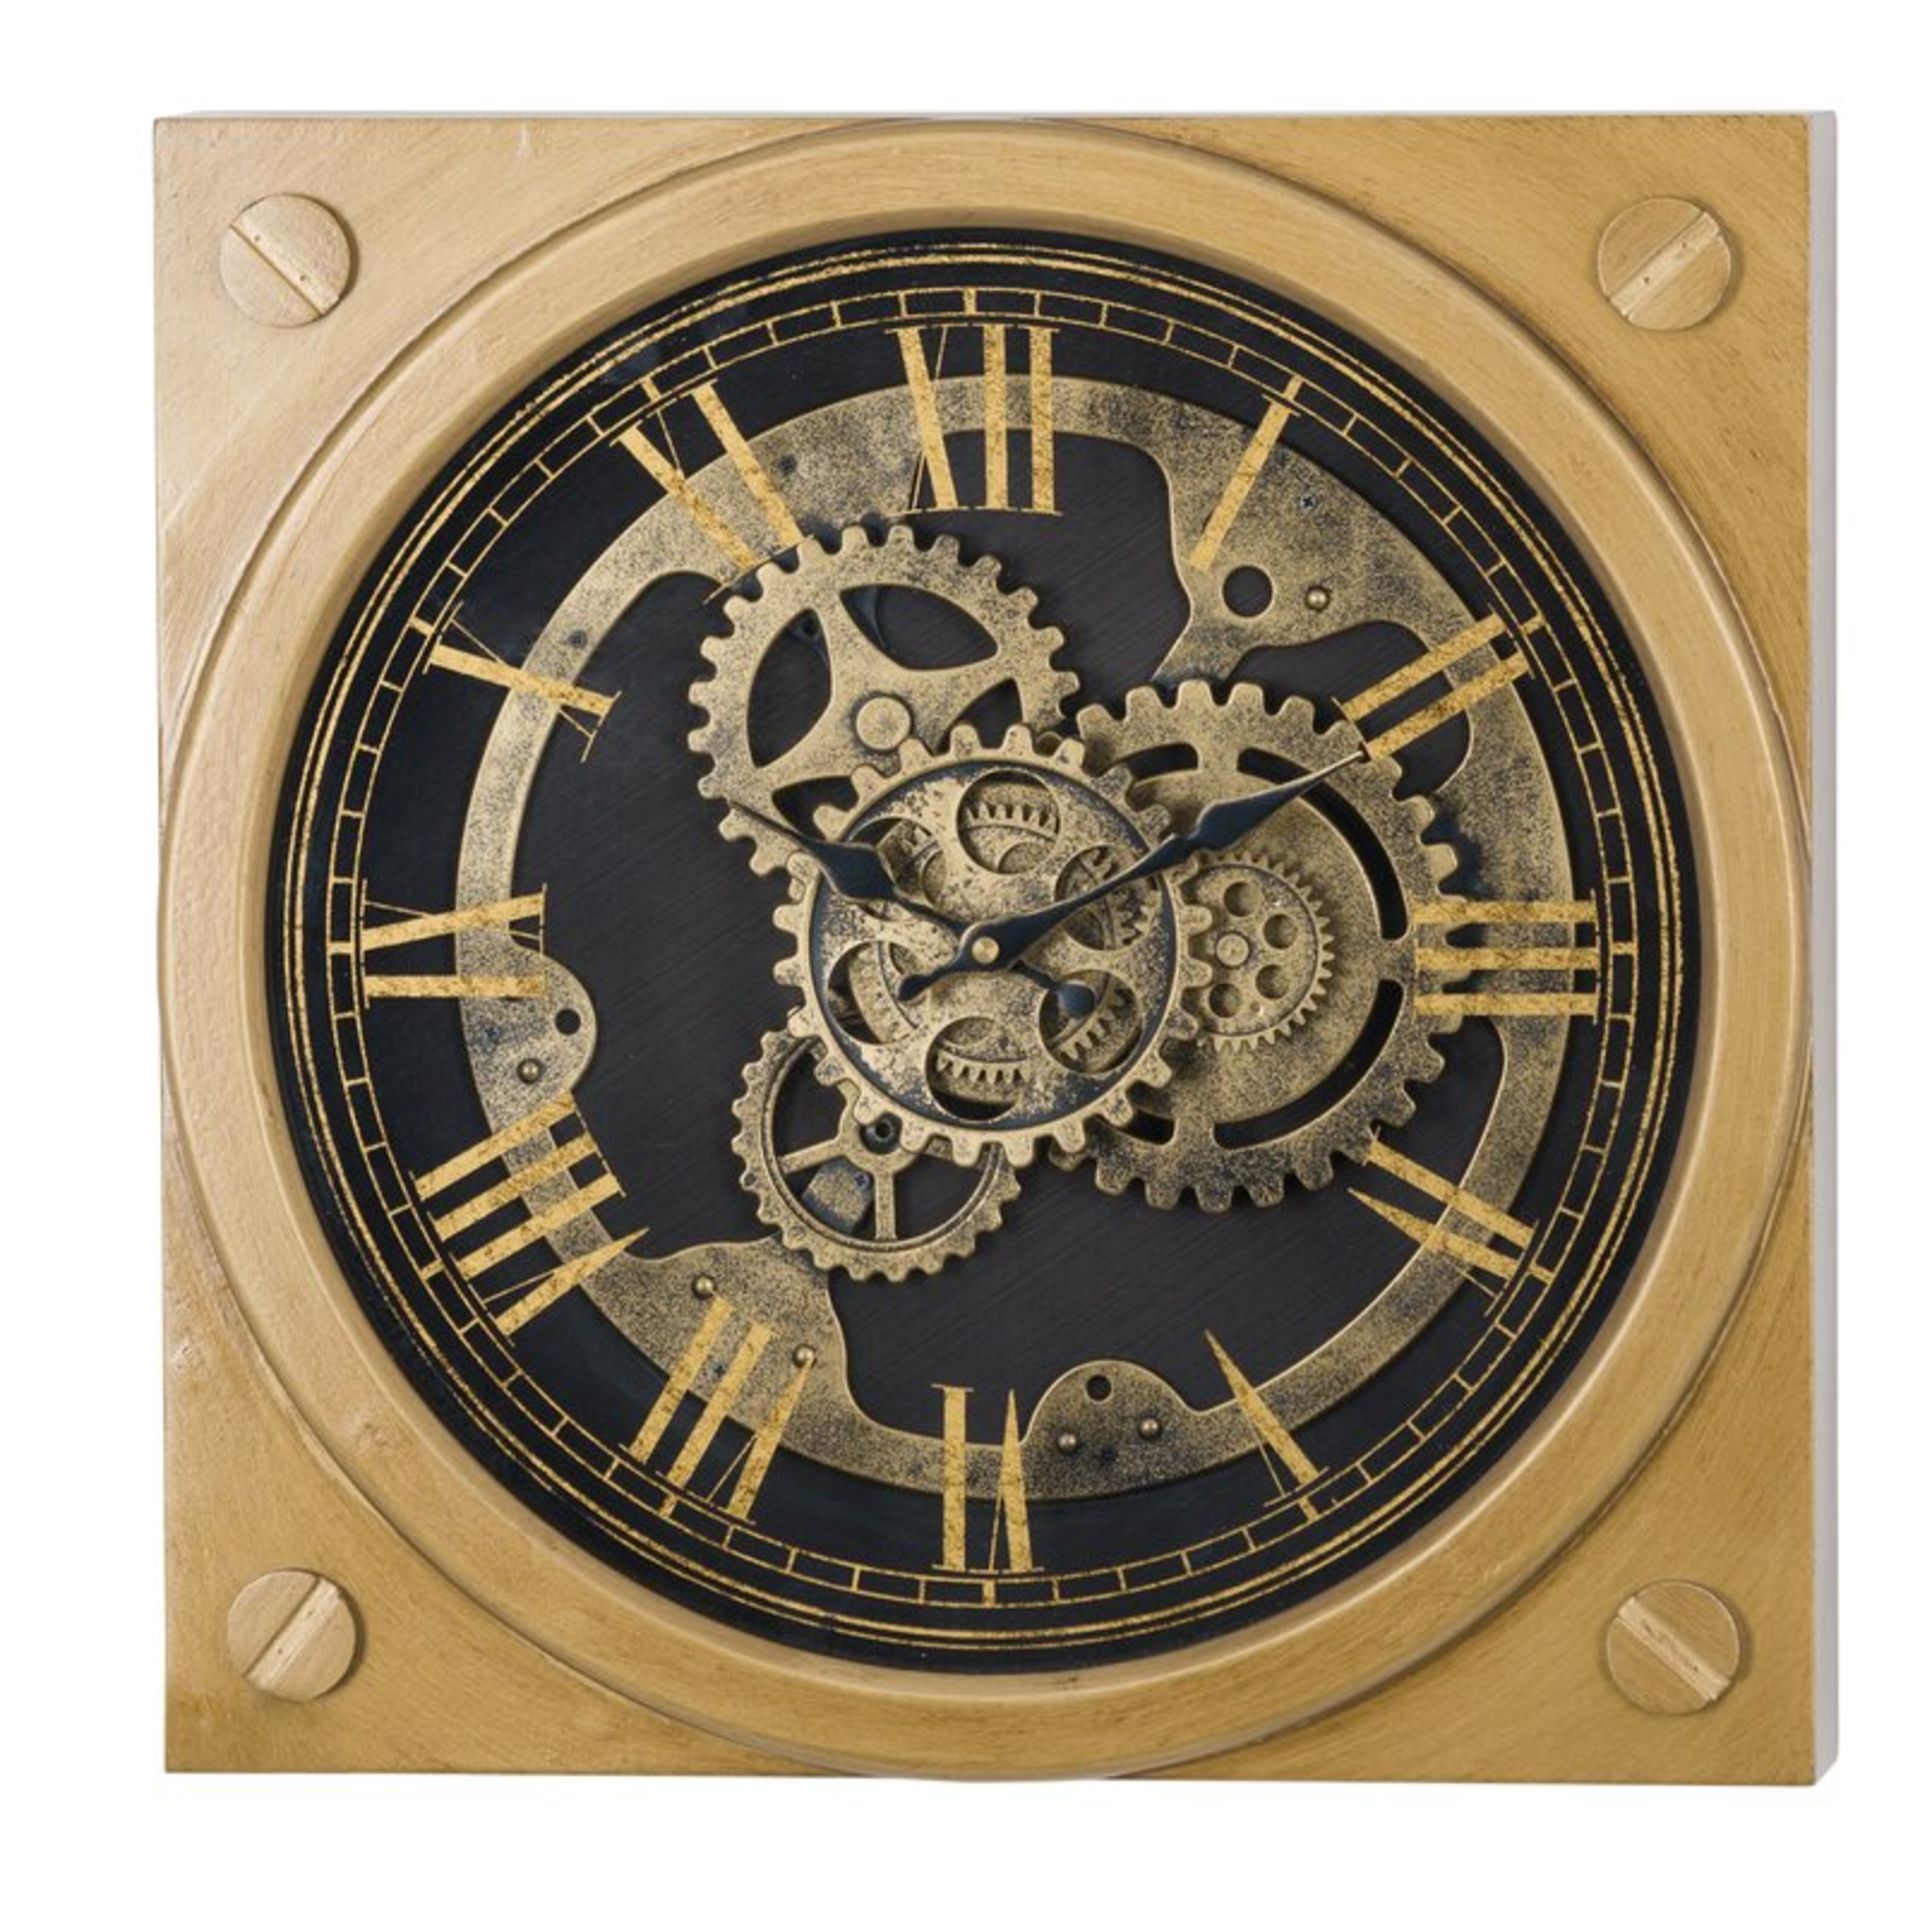 Square Gold Moving Mechanism Clock A Unique And Handsome Addition To Any Interior That Will Be